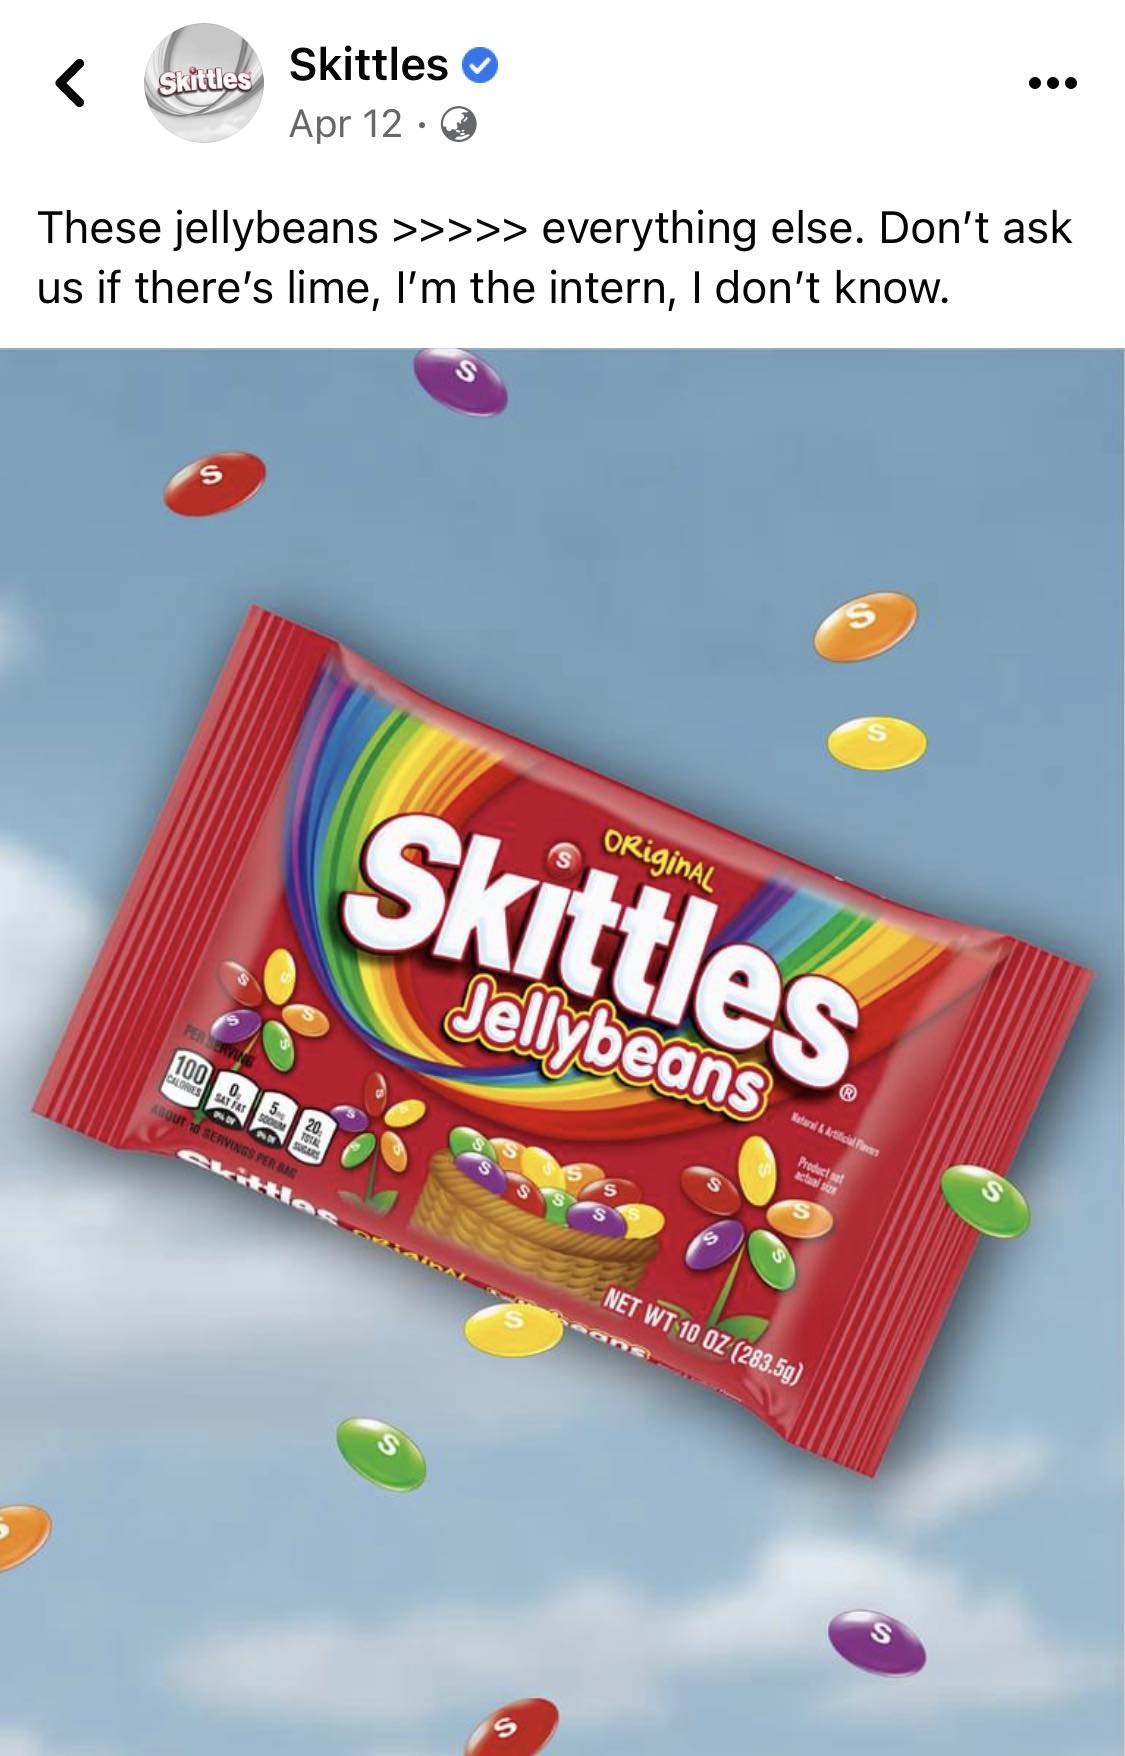 humorous marketing message by skittles